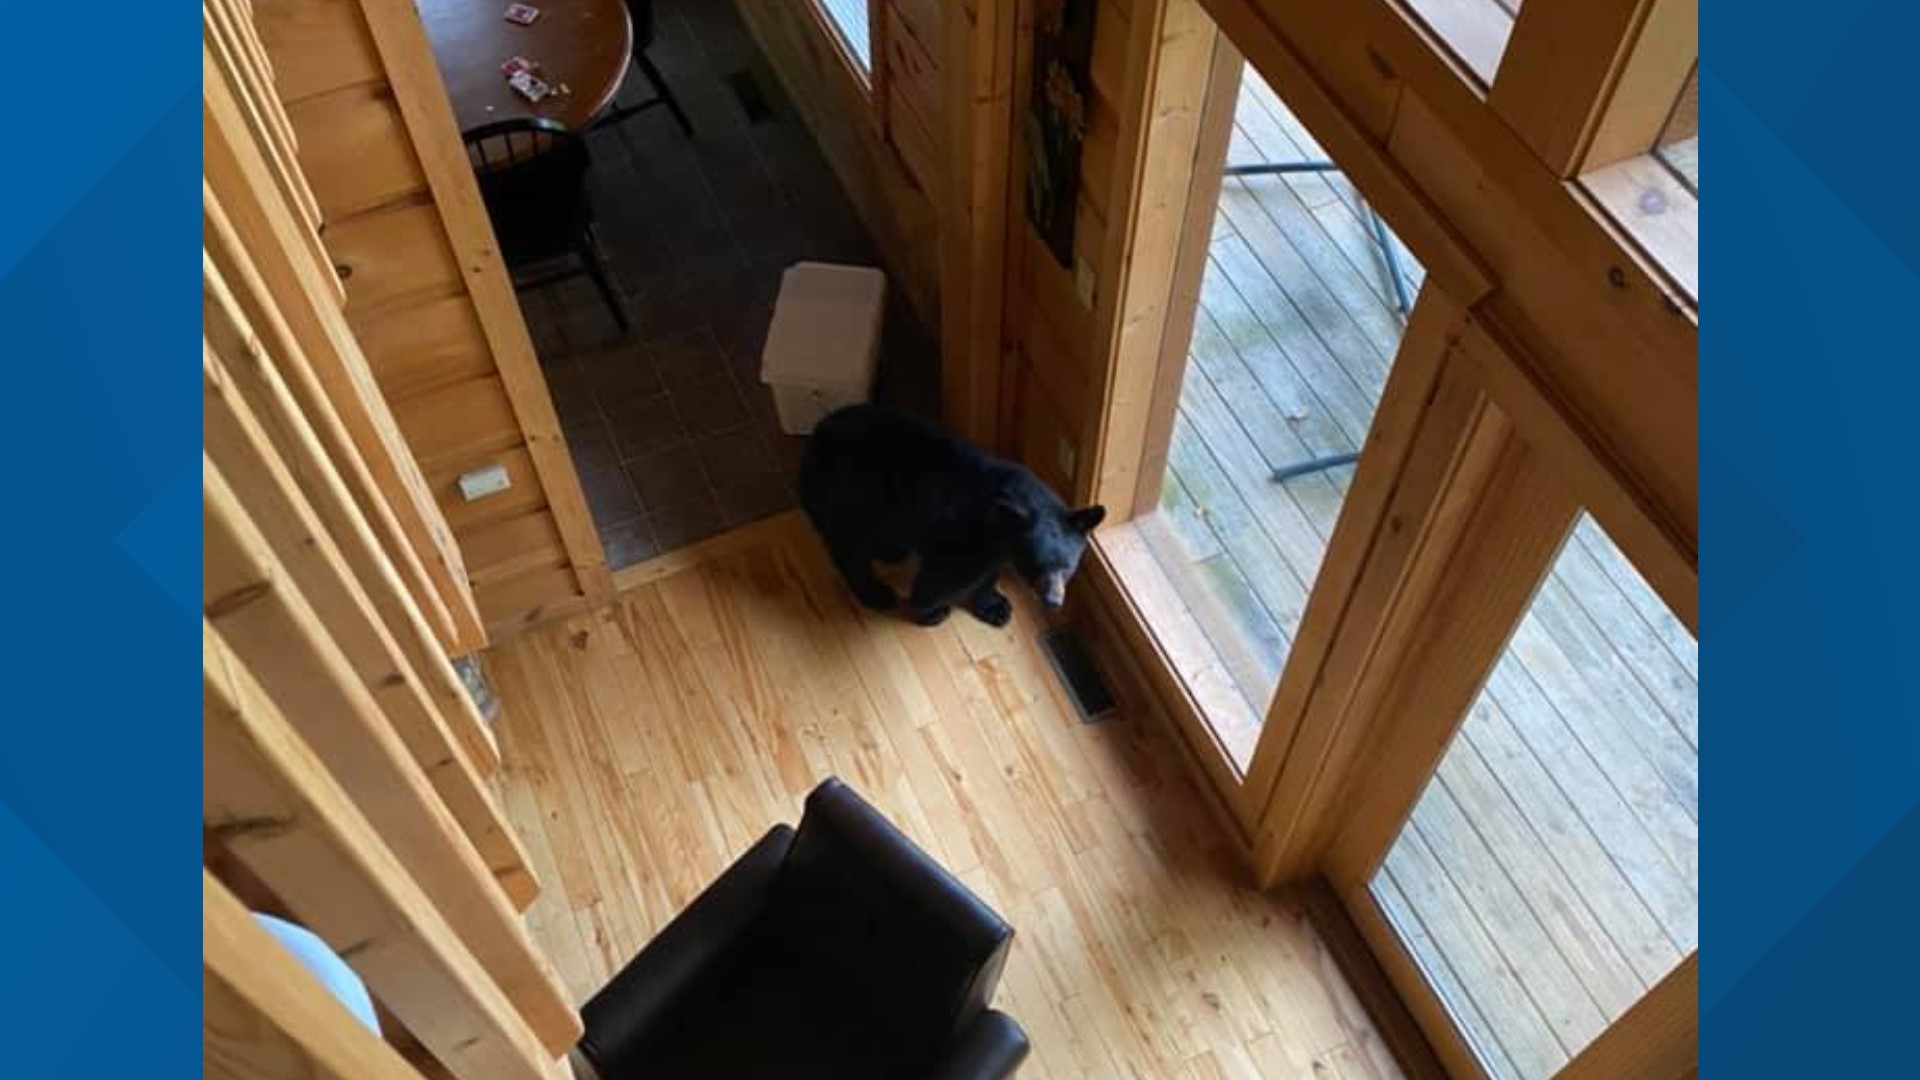 Michelle Eberhardt and a friend were shocked on Friday morning to find a baby black bear inside their Gatlinburg cabin.